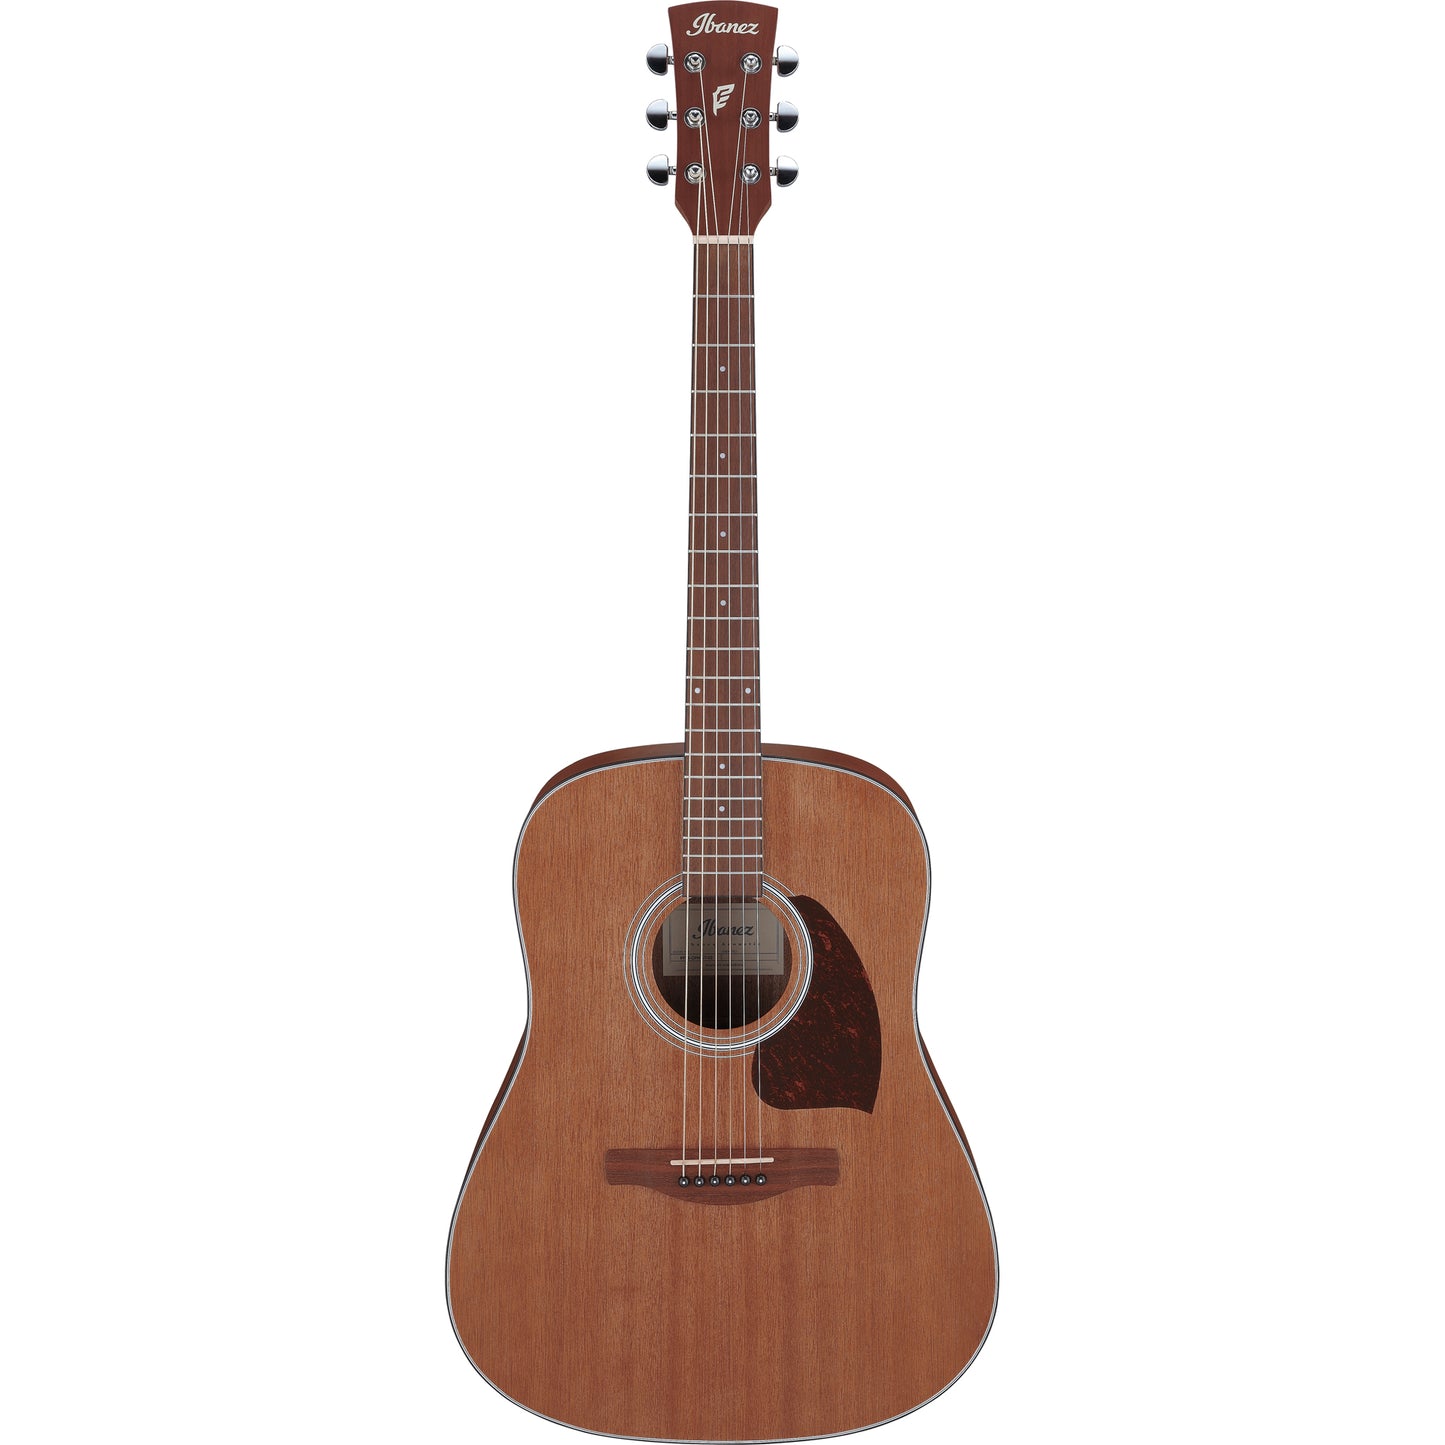 Ibanez PF54 6 String Acoustic Guitar - Open Pore Natural